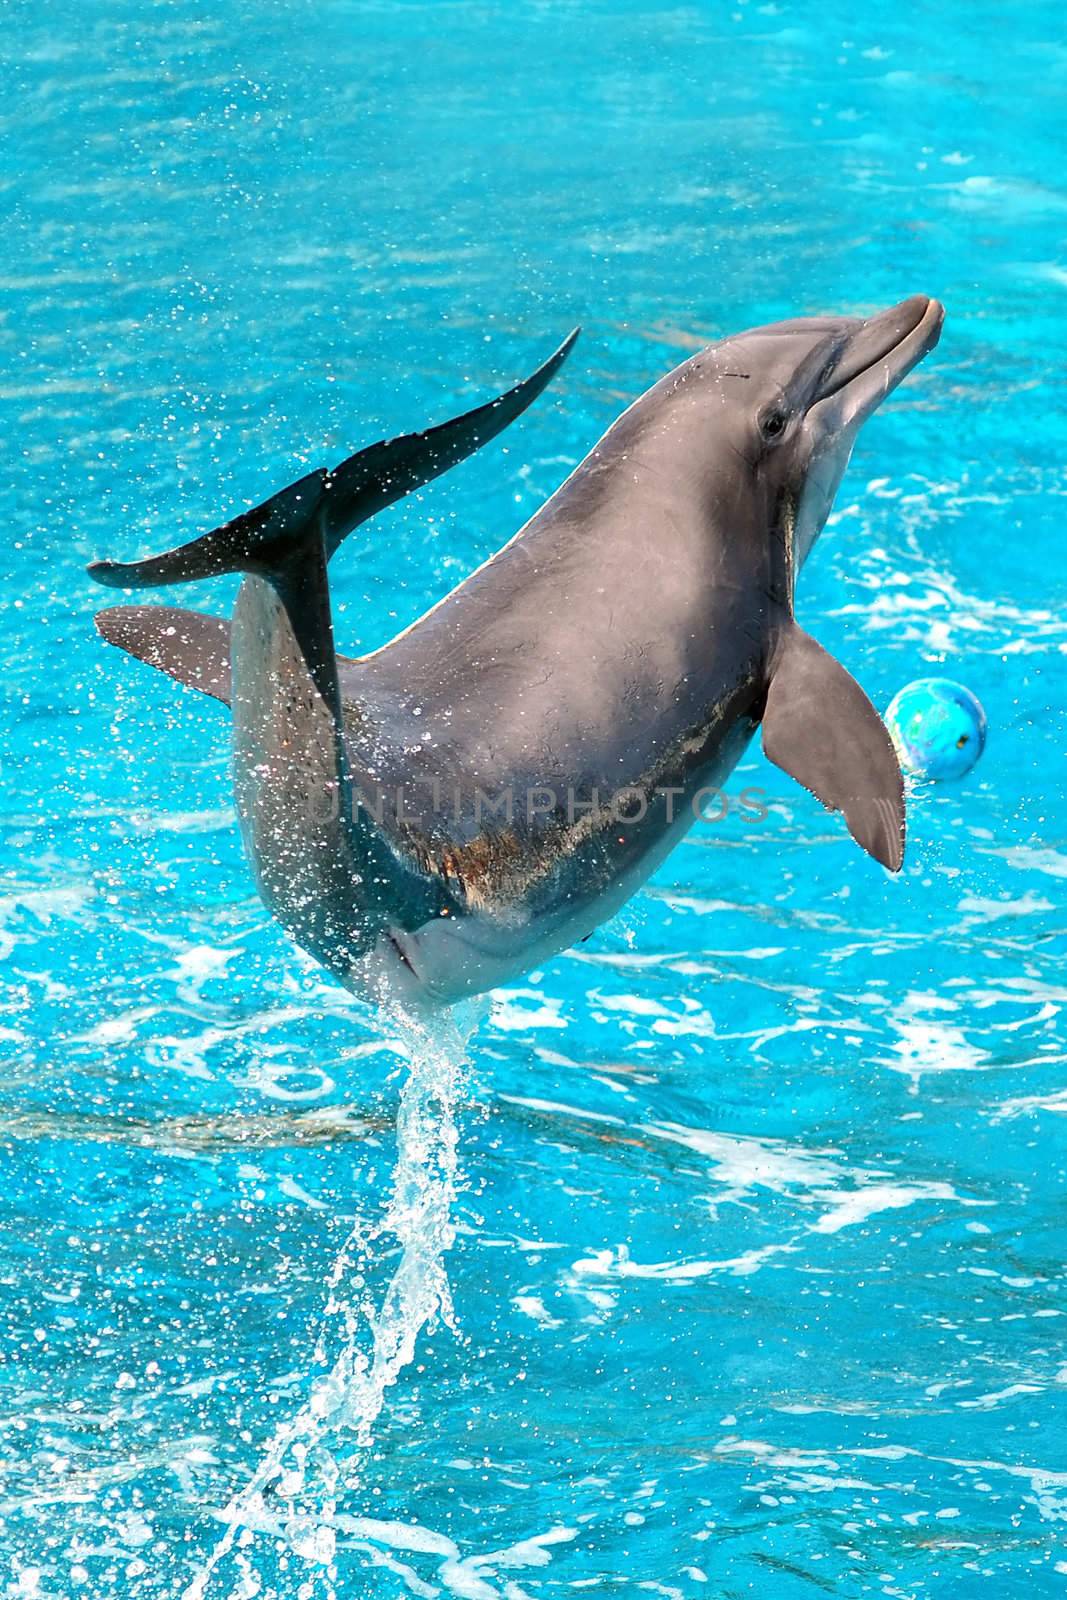 Dolphin plays in pool